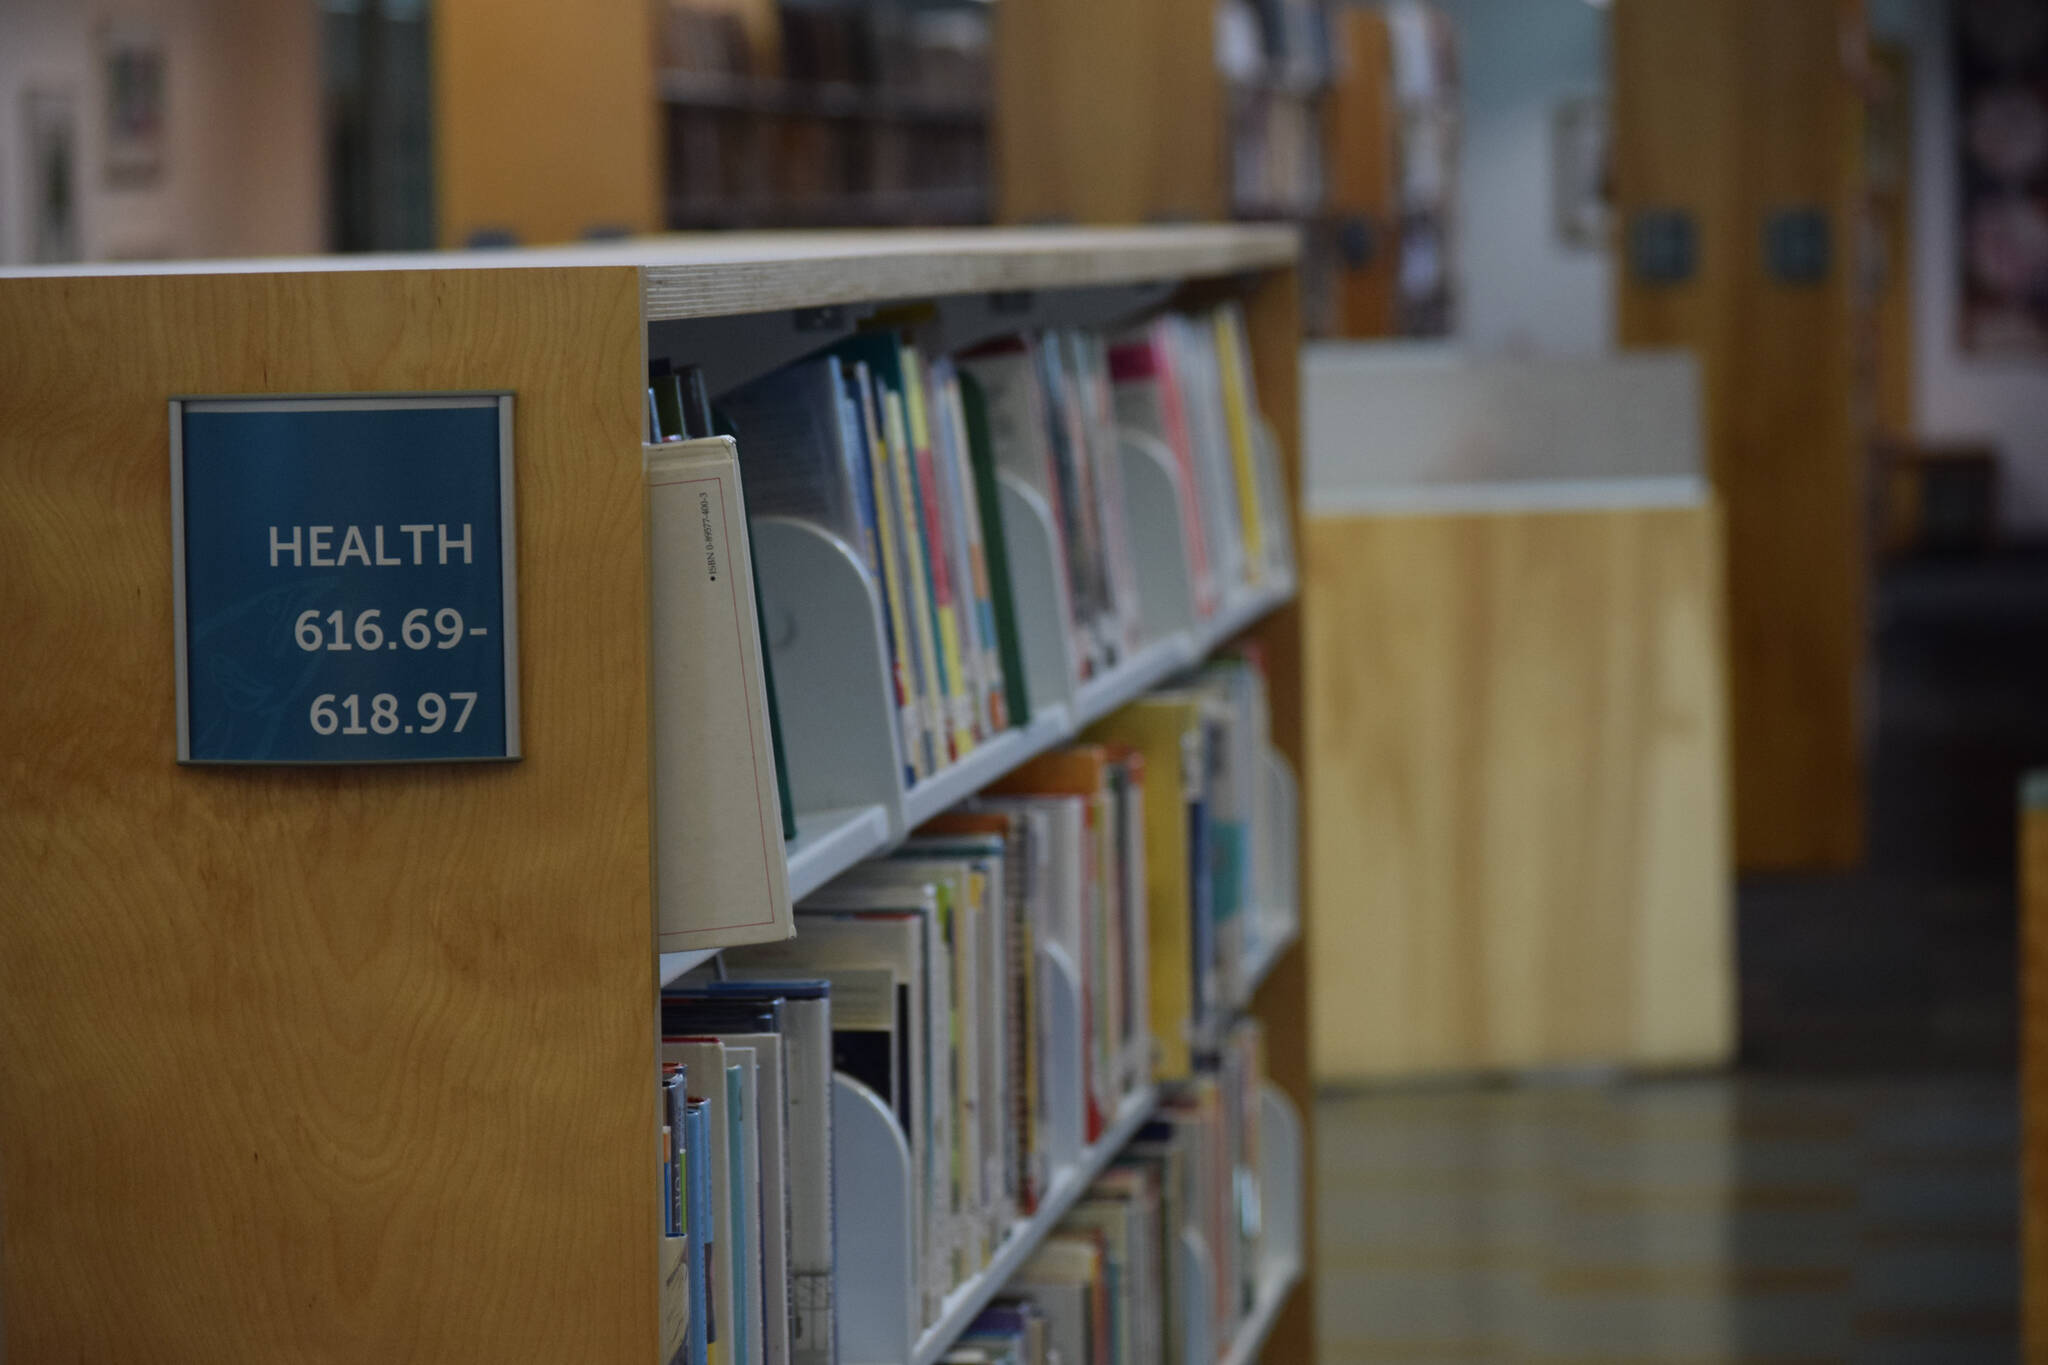 Camille Botello/Peninsula Clarion
The Kenai Community Library health section is seen on Oct. 26. After the Kenai City Council postponed a vote to approve a grant funding health and wellness books, community members set up a GoFundMe to support the purchase of materials.